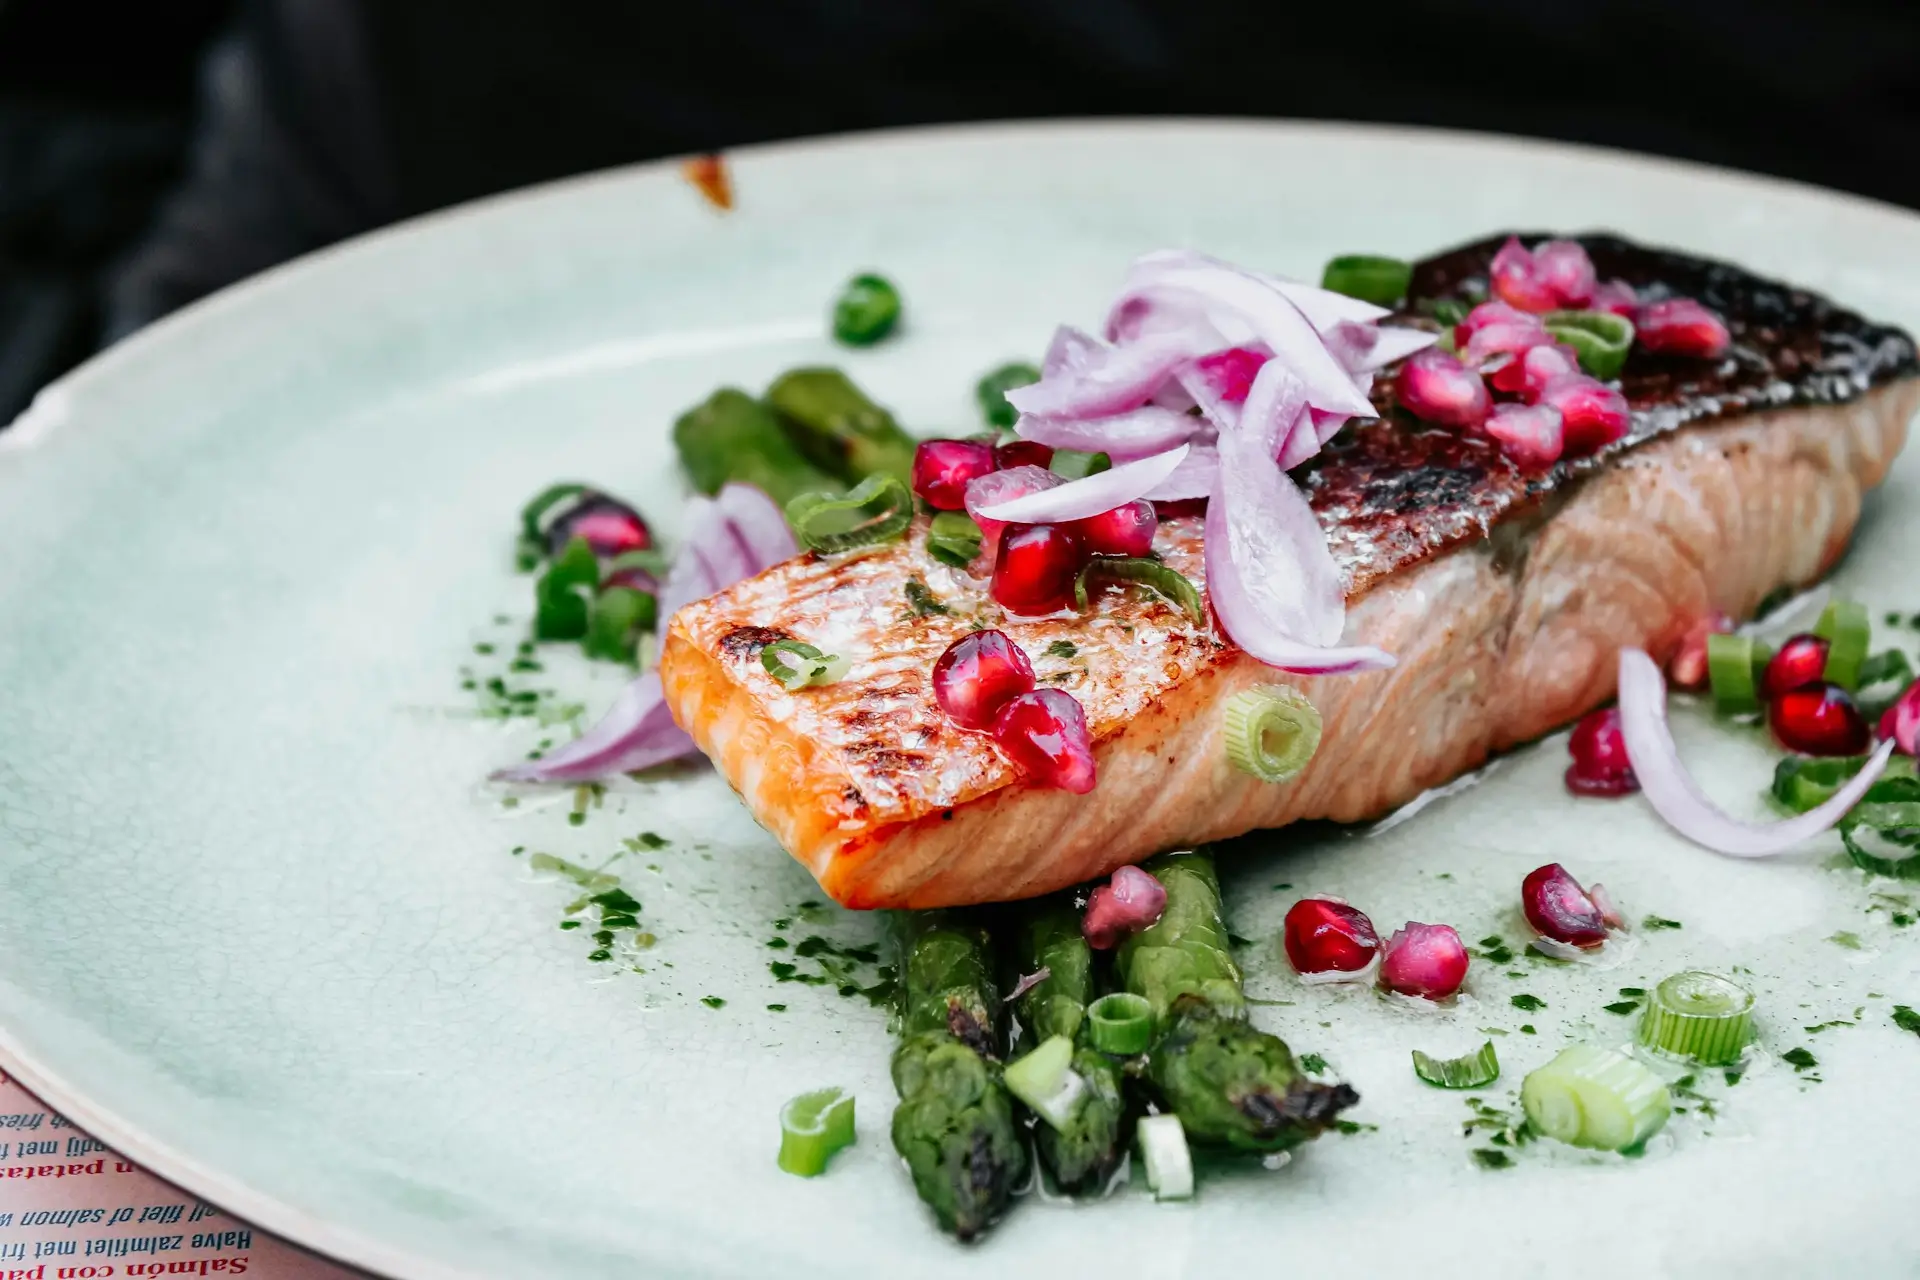 Salmon on a plate with onion and greens